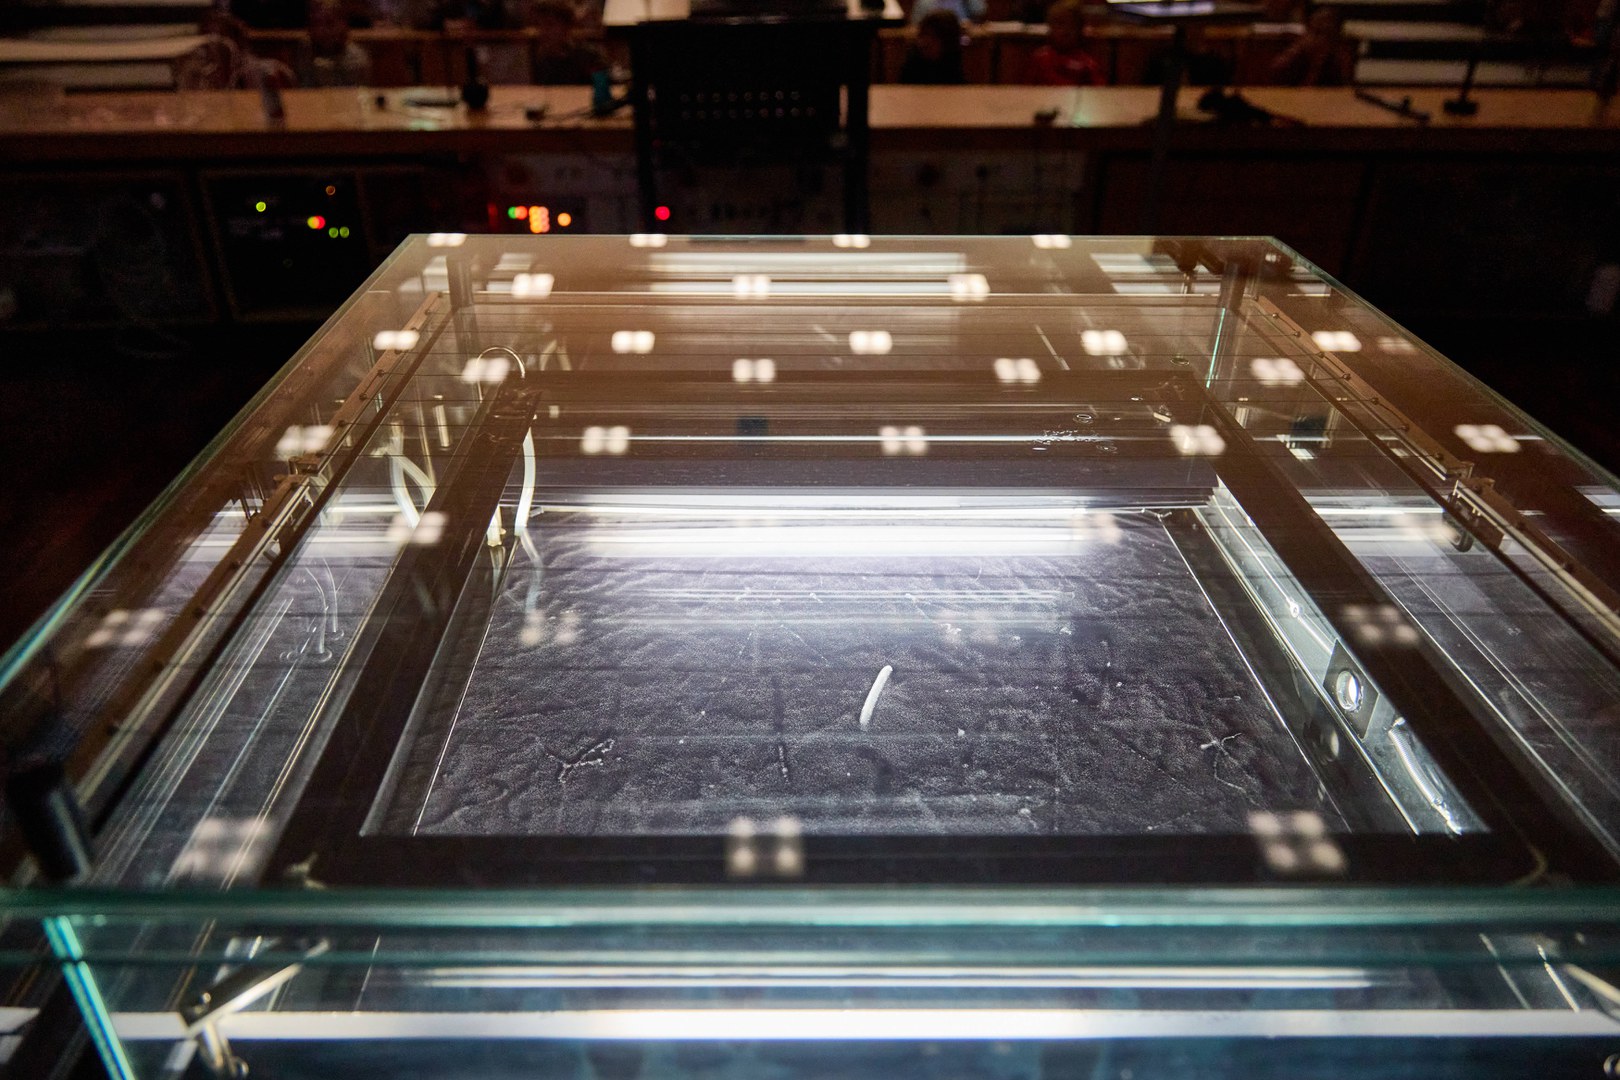 Experiment 6: Particle detectors, such as a cloud chamber, make traces of particles visible.